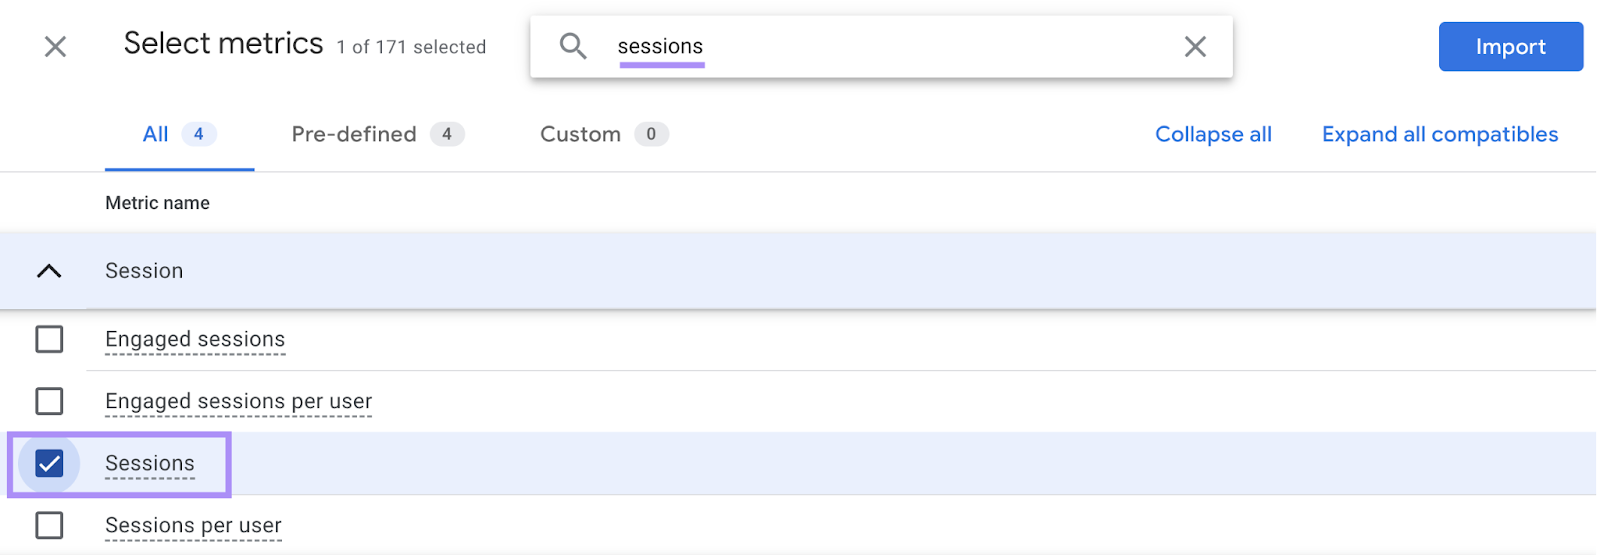 “sessions” selected under "Select metrics" section